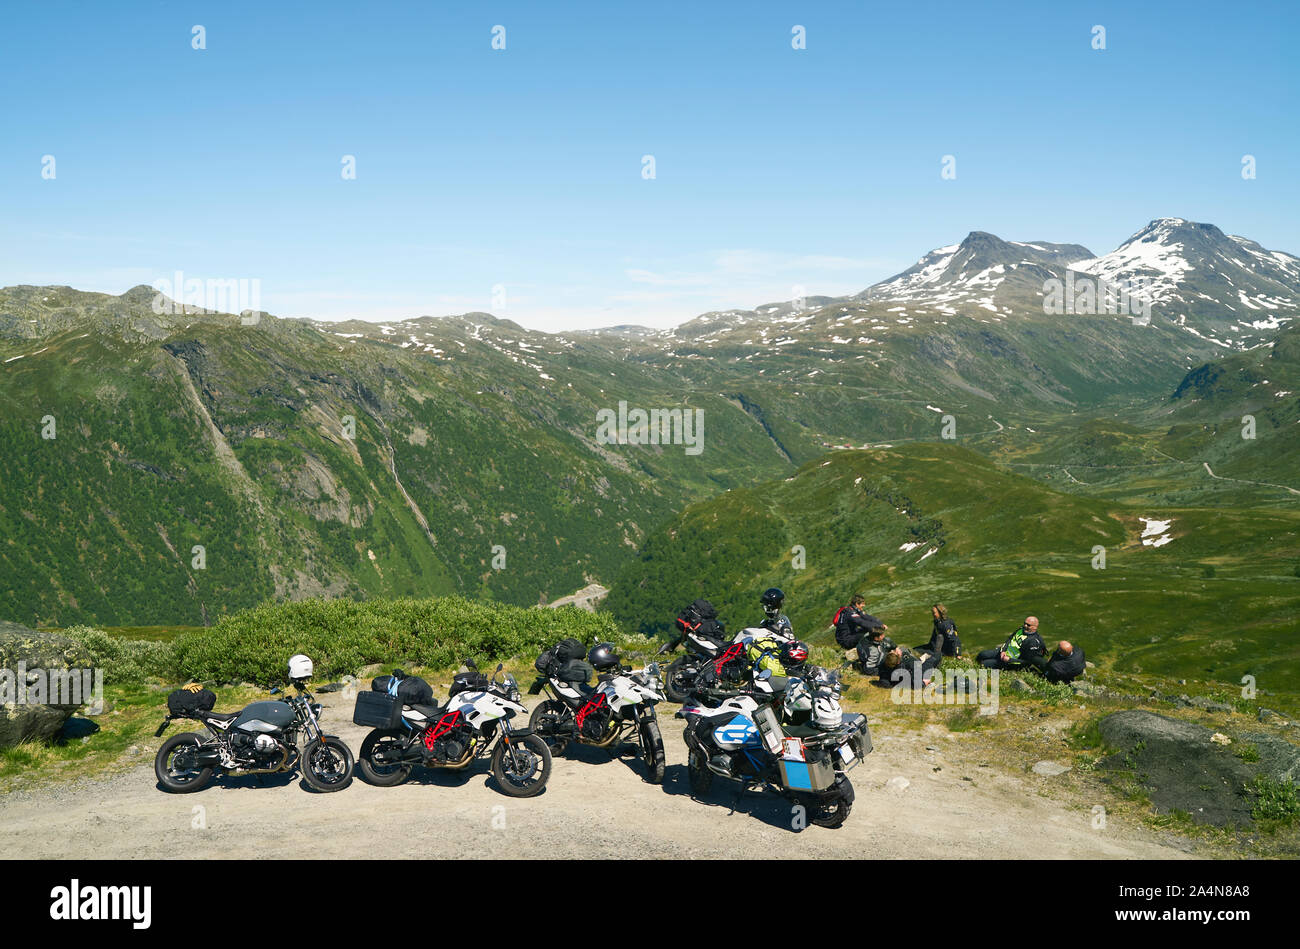 Bikers resting in mountains Stock Photo